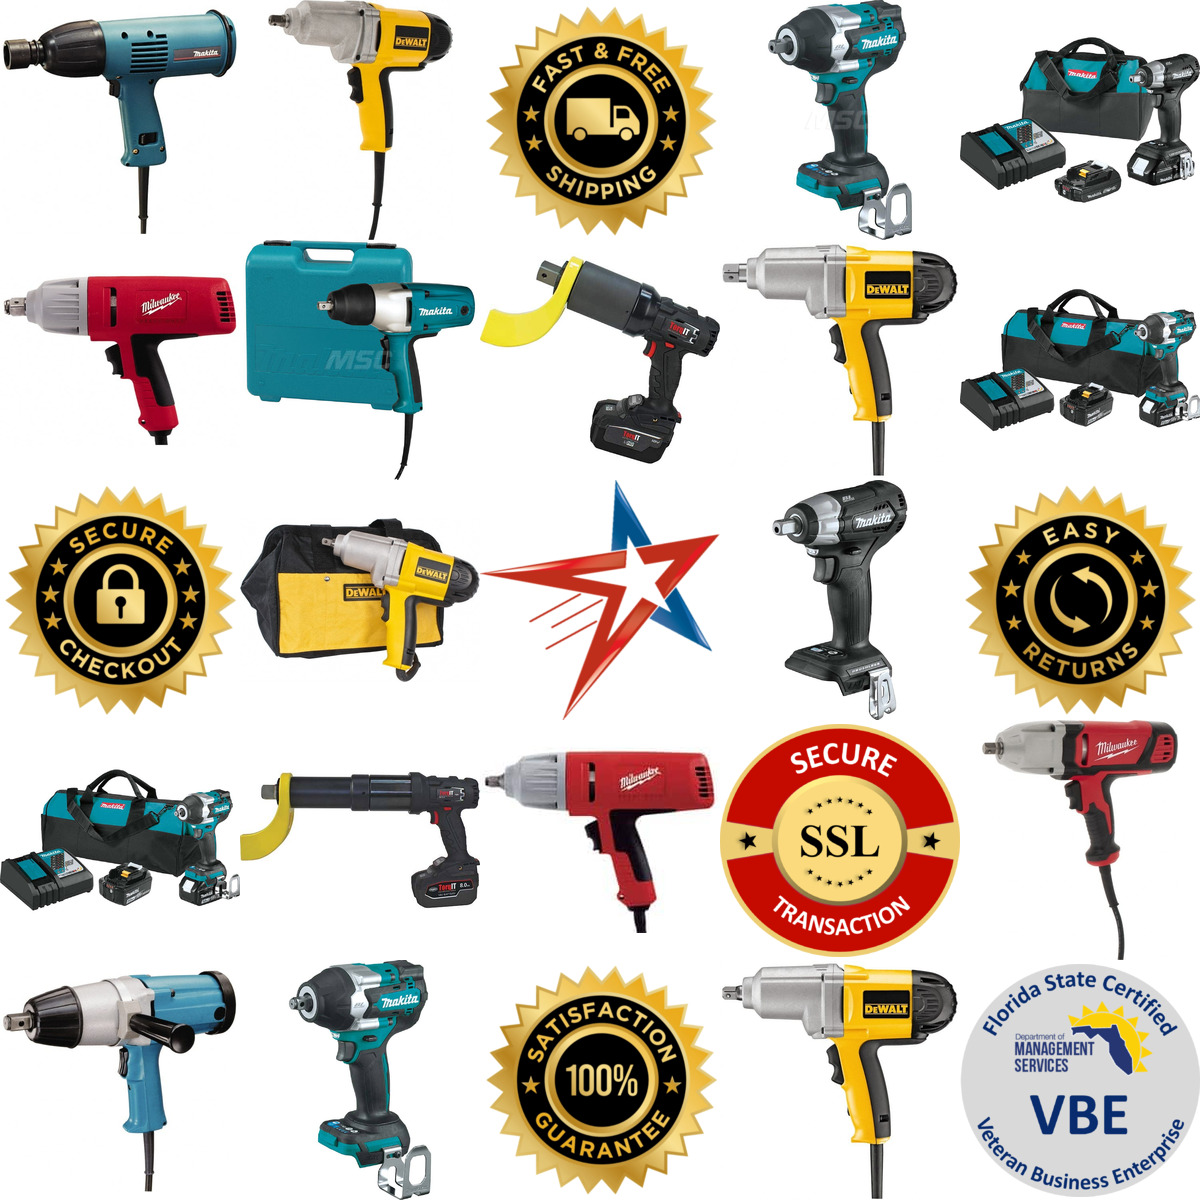 A selection of Electric Impact Wrenches and Ratchets products on GoVets